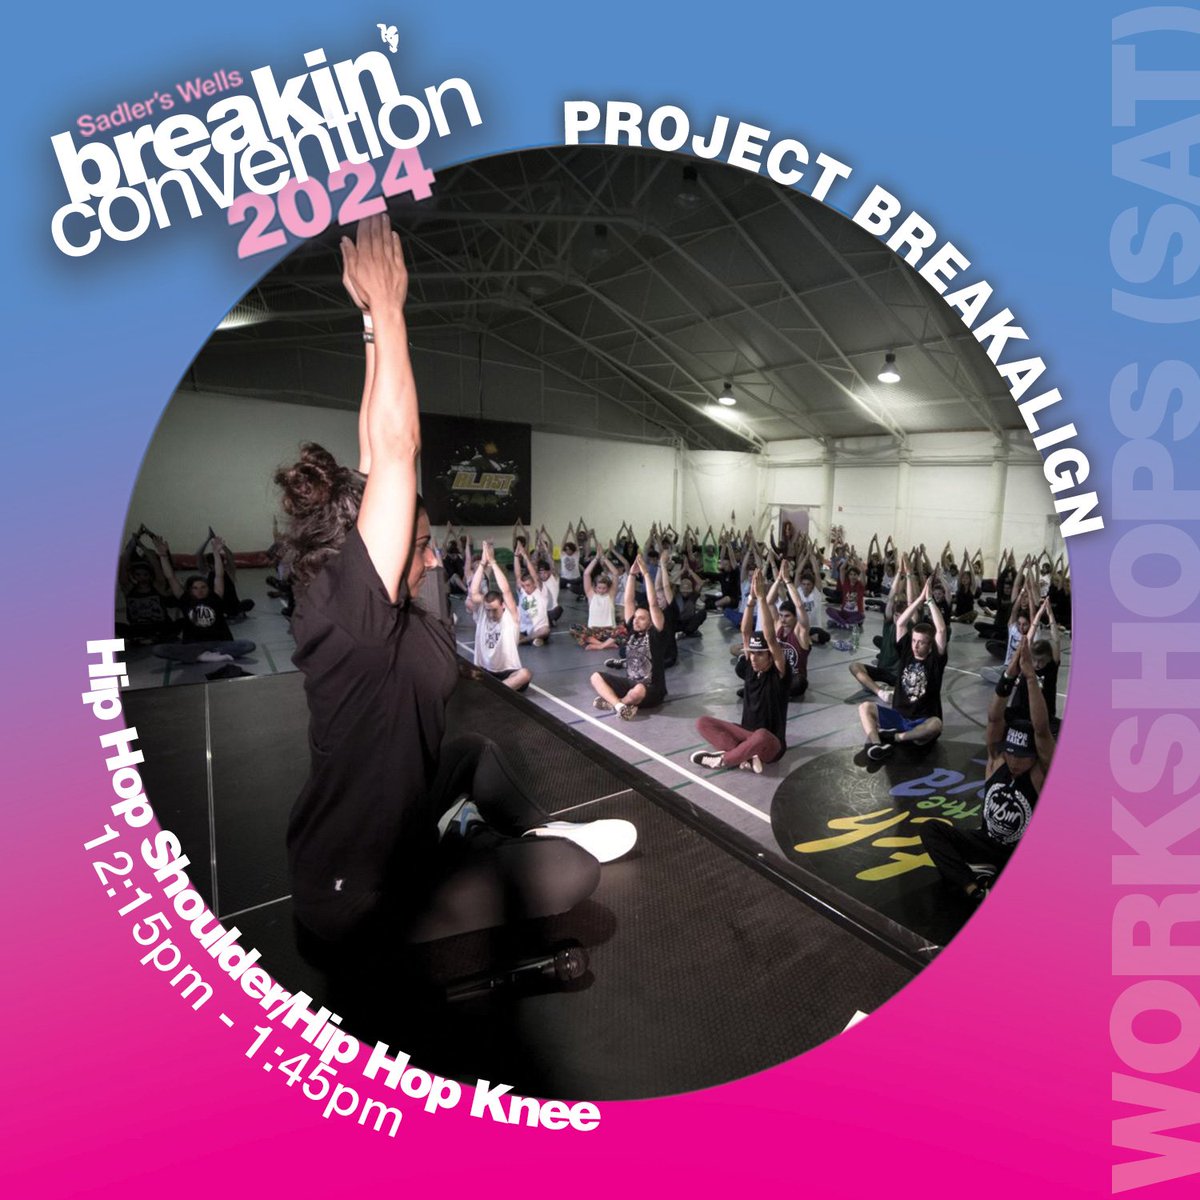 x.com/bgirlsmash/sta… 🕴🏾'Hip-hop shoulder💪🏼' & 'Hip-hop knee🦵🏾' workshop at @BConvention Taught by Team @ProjeBreakalign on Saturday May 4th🗓️ Promo code for half price ticket available💷. Contact @bgirlSmash 👩🏽‍⚕️